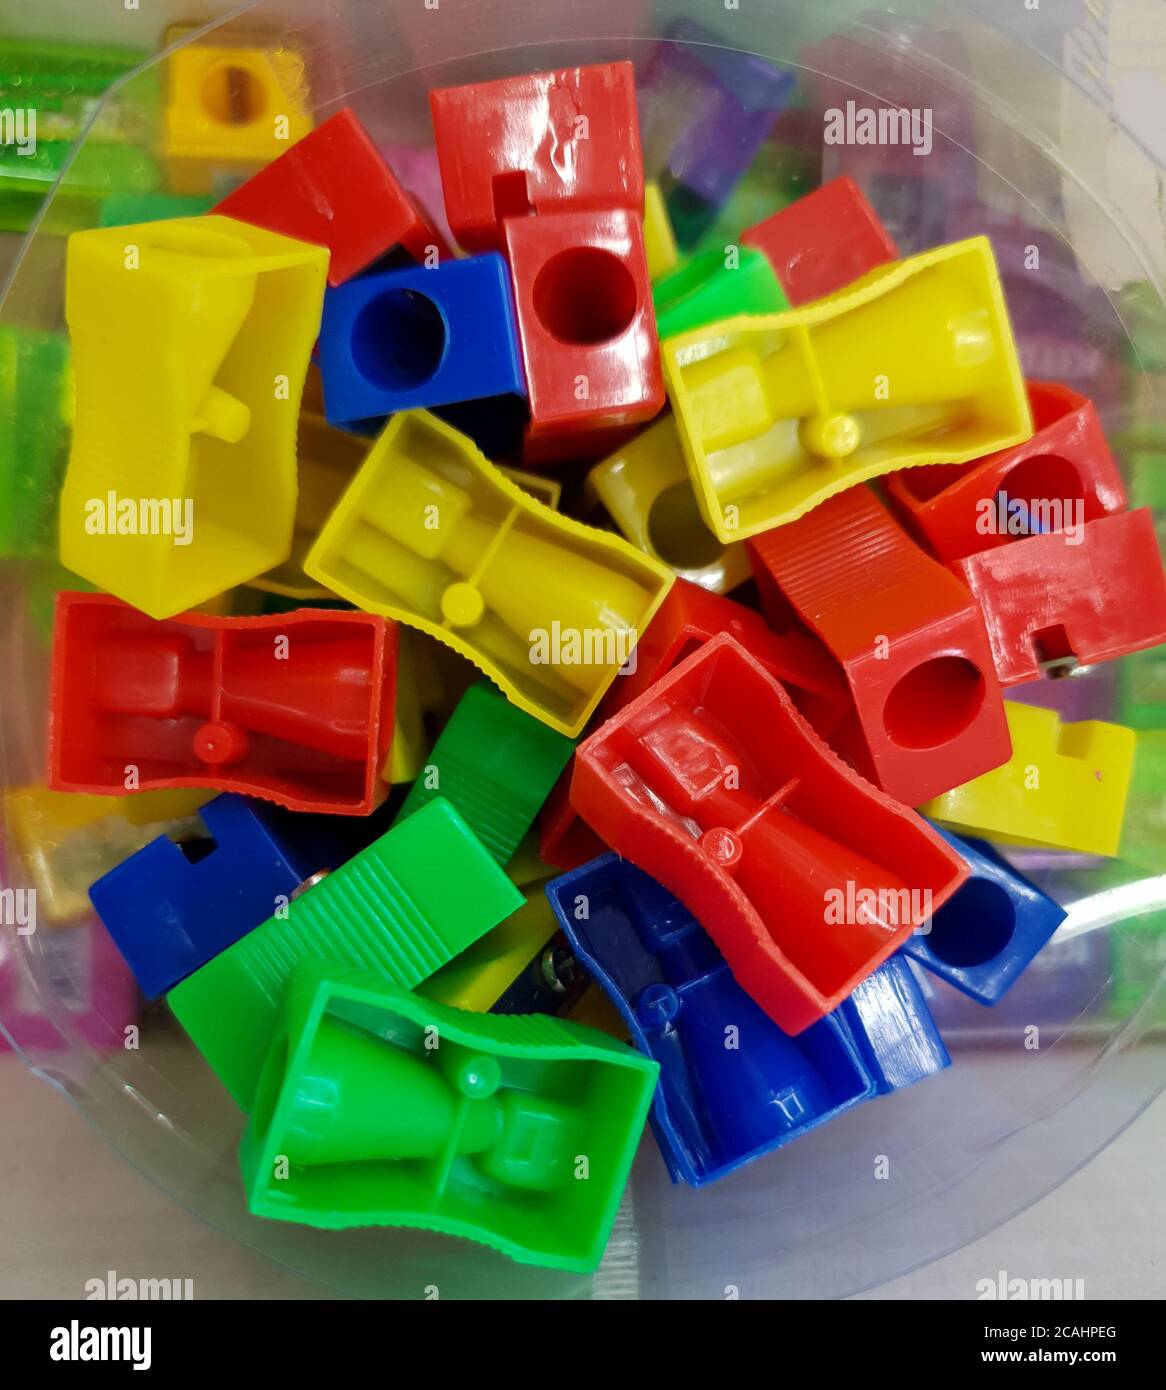 multi-colored pencil sharpeners at the store sale Stock Photo